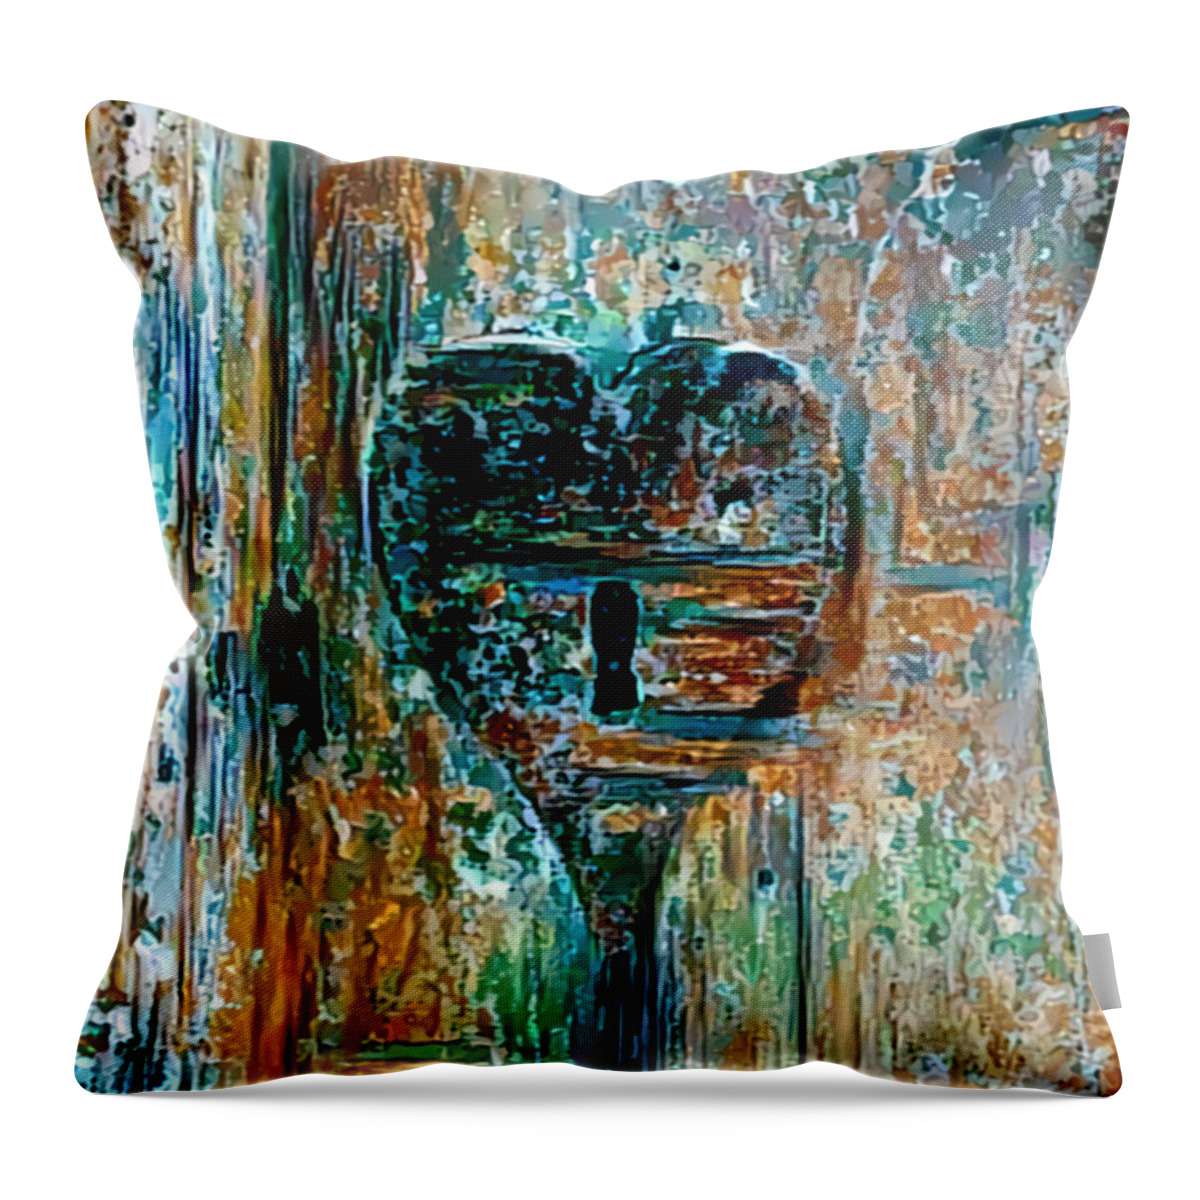 Artistic Mystic Throw Pillow featuring the digital art Secrets - 118 by Artistic Mystic